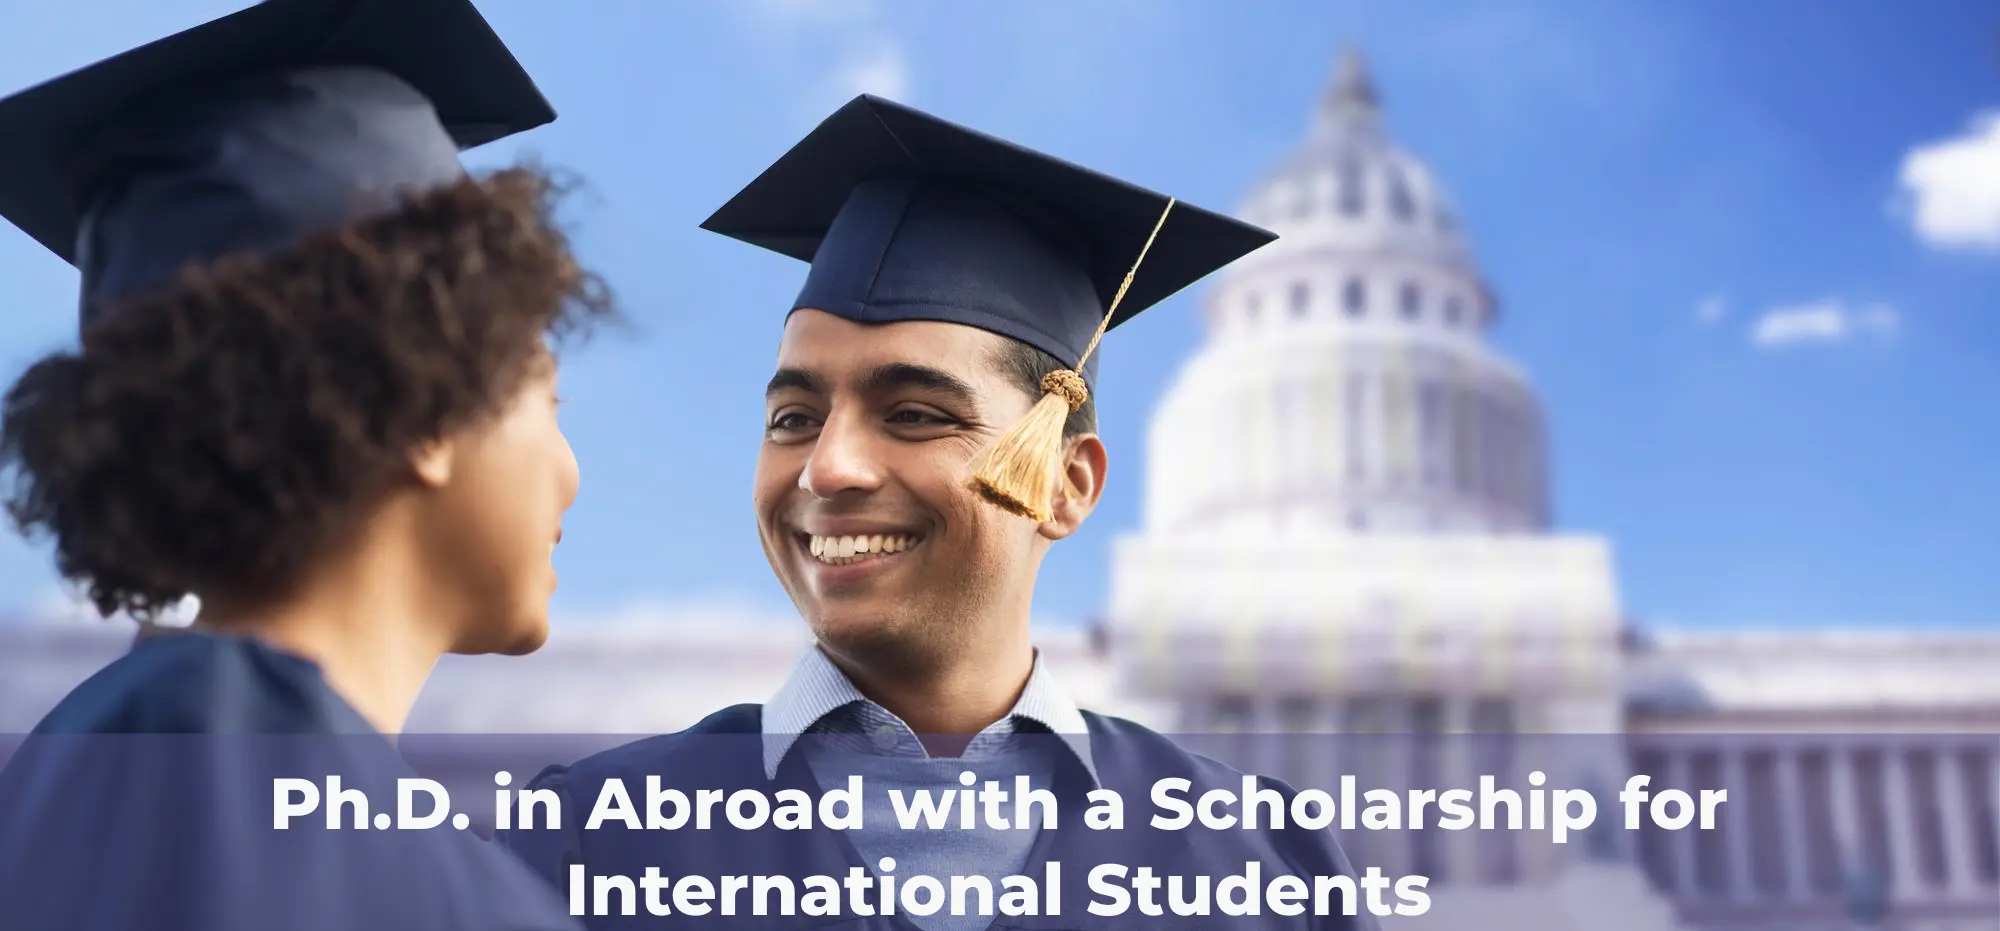 Ph.D. in abroad with a scholarship for international students post thumbnail image